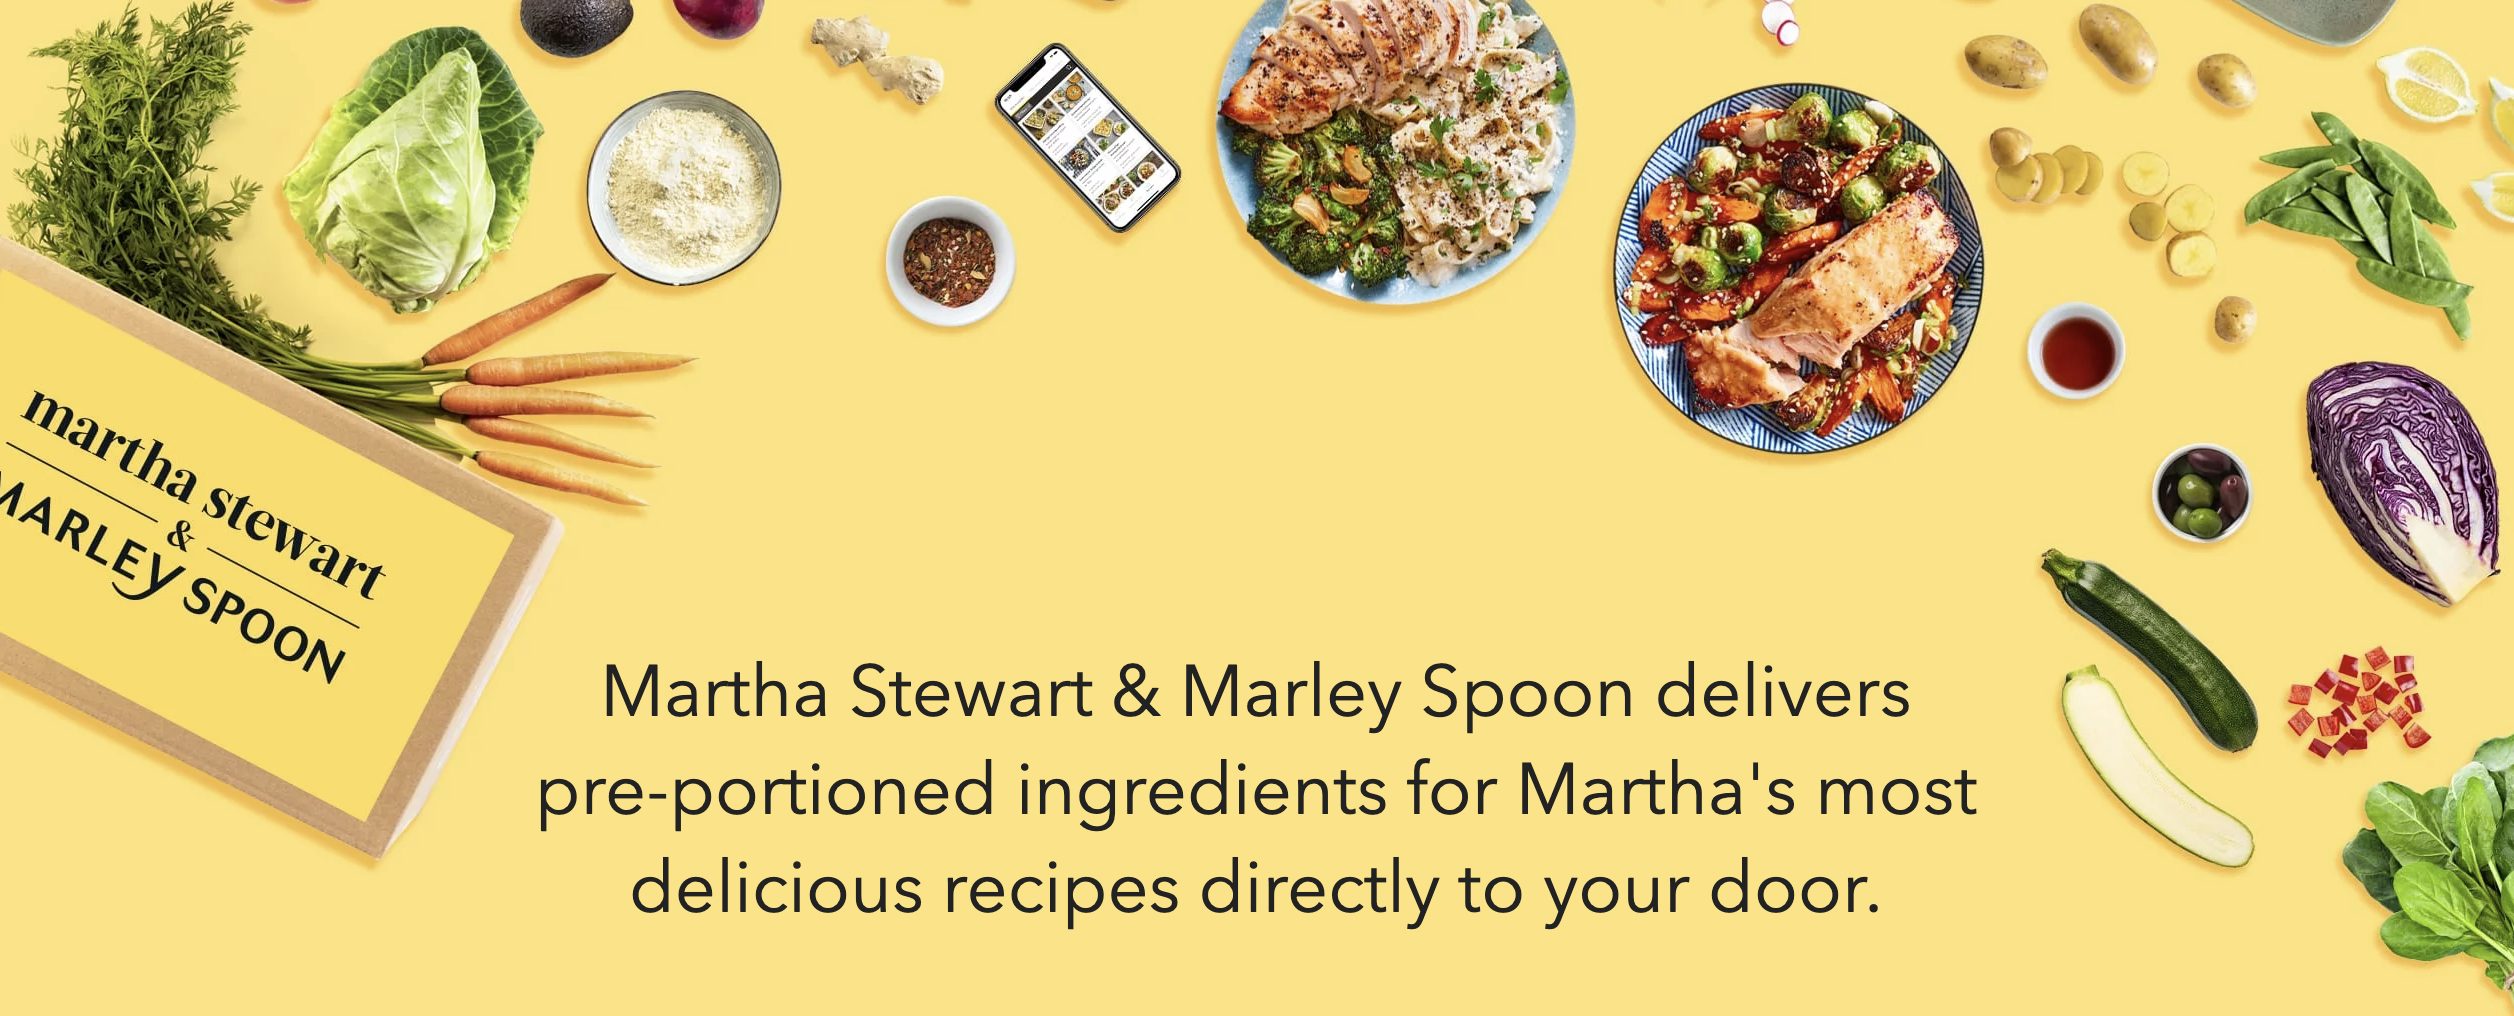 Marley Spoon Meal Delivery